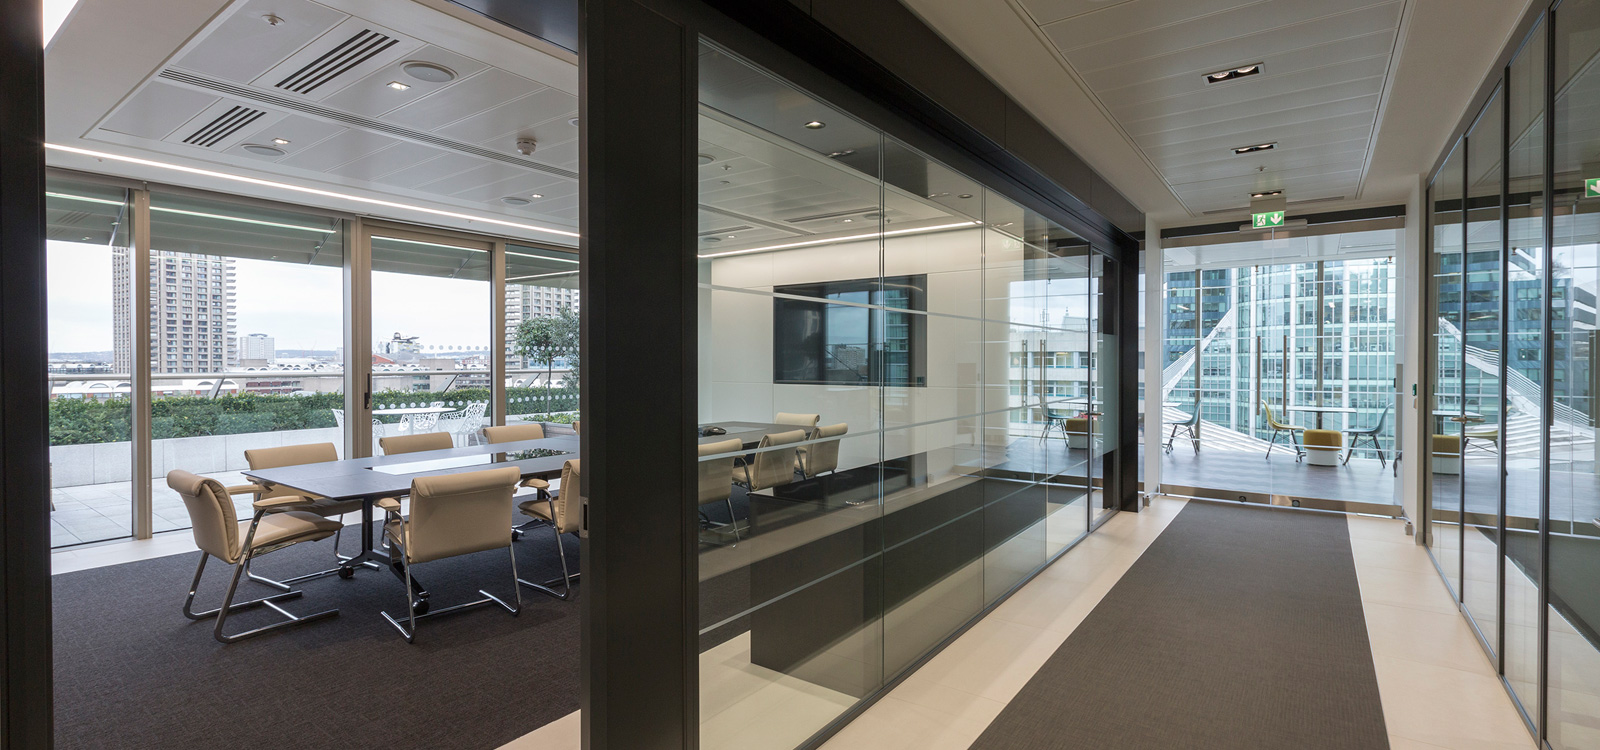 Interiors - Monochromatic office interiors fit out in London